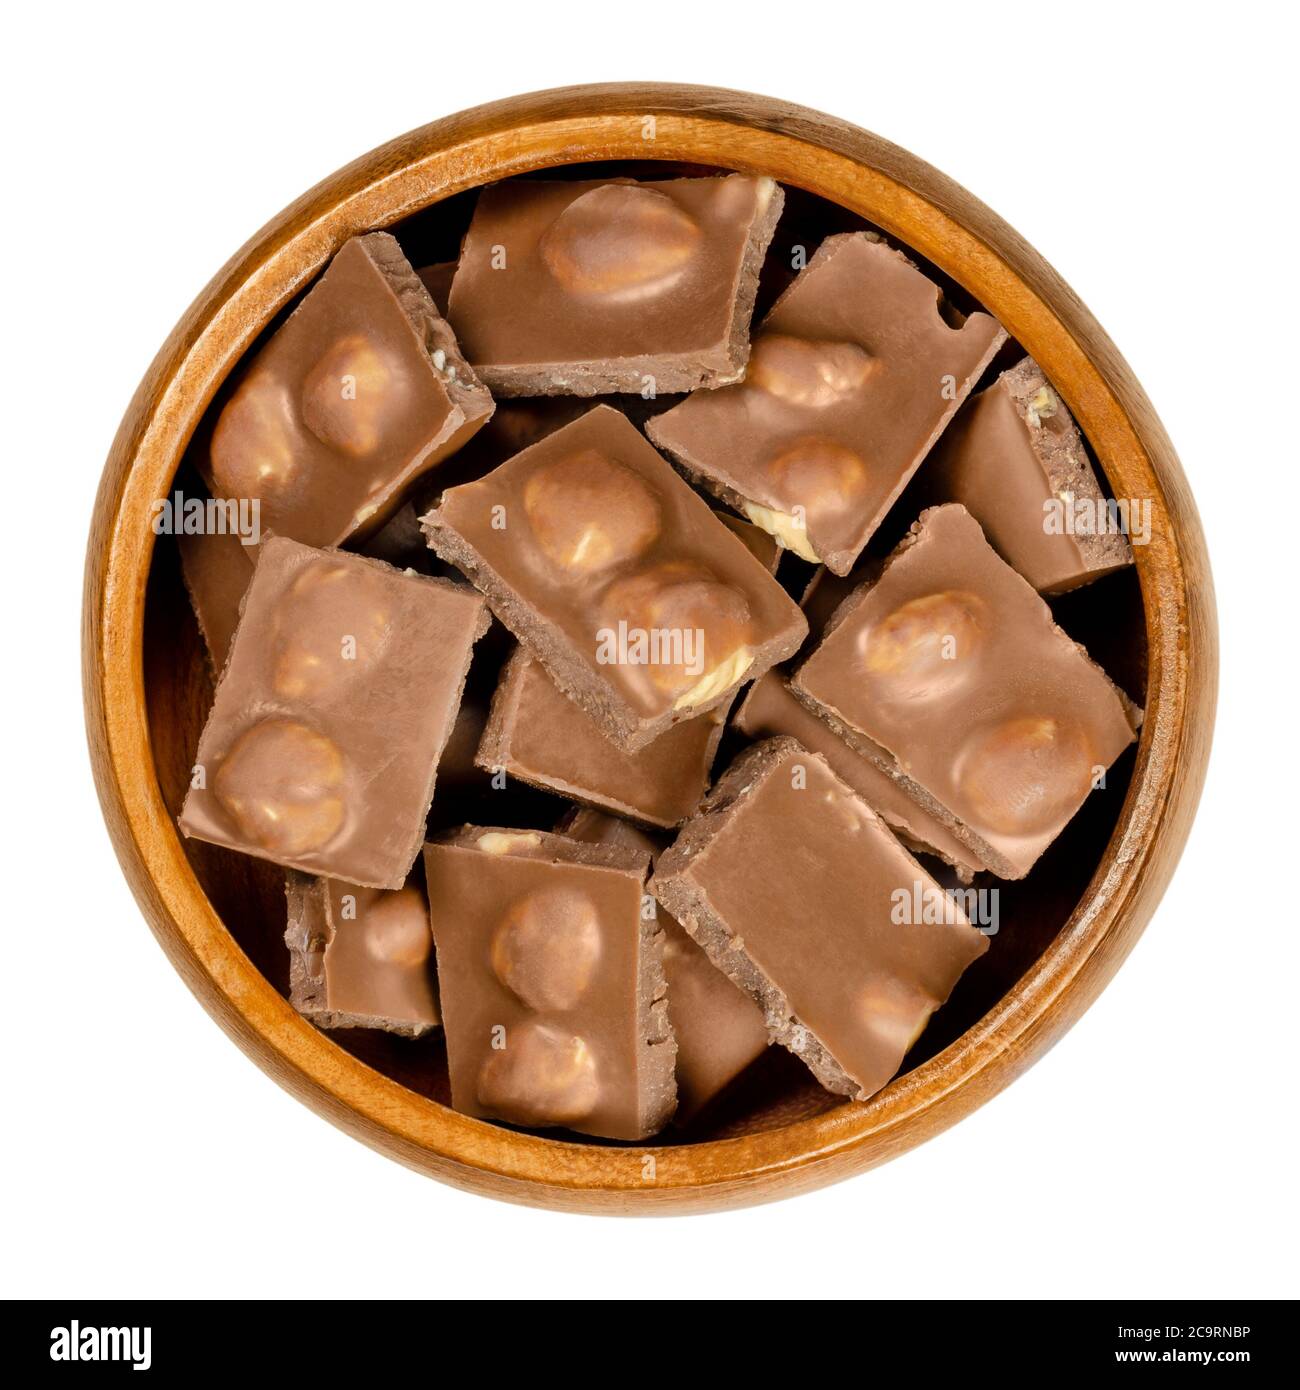 Hazelnut milk chocolate, bars broken into pieces, in wooden bowl. Small segments of candy bar. Milk chocolate with whole roasted hazelnuts. Stock Photo